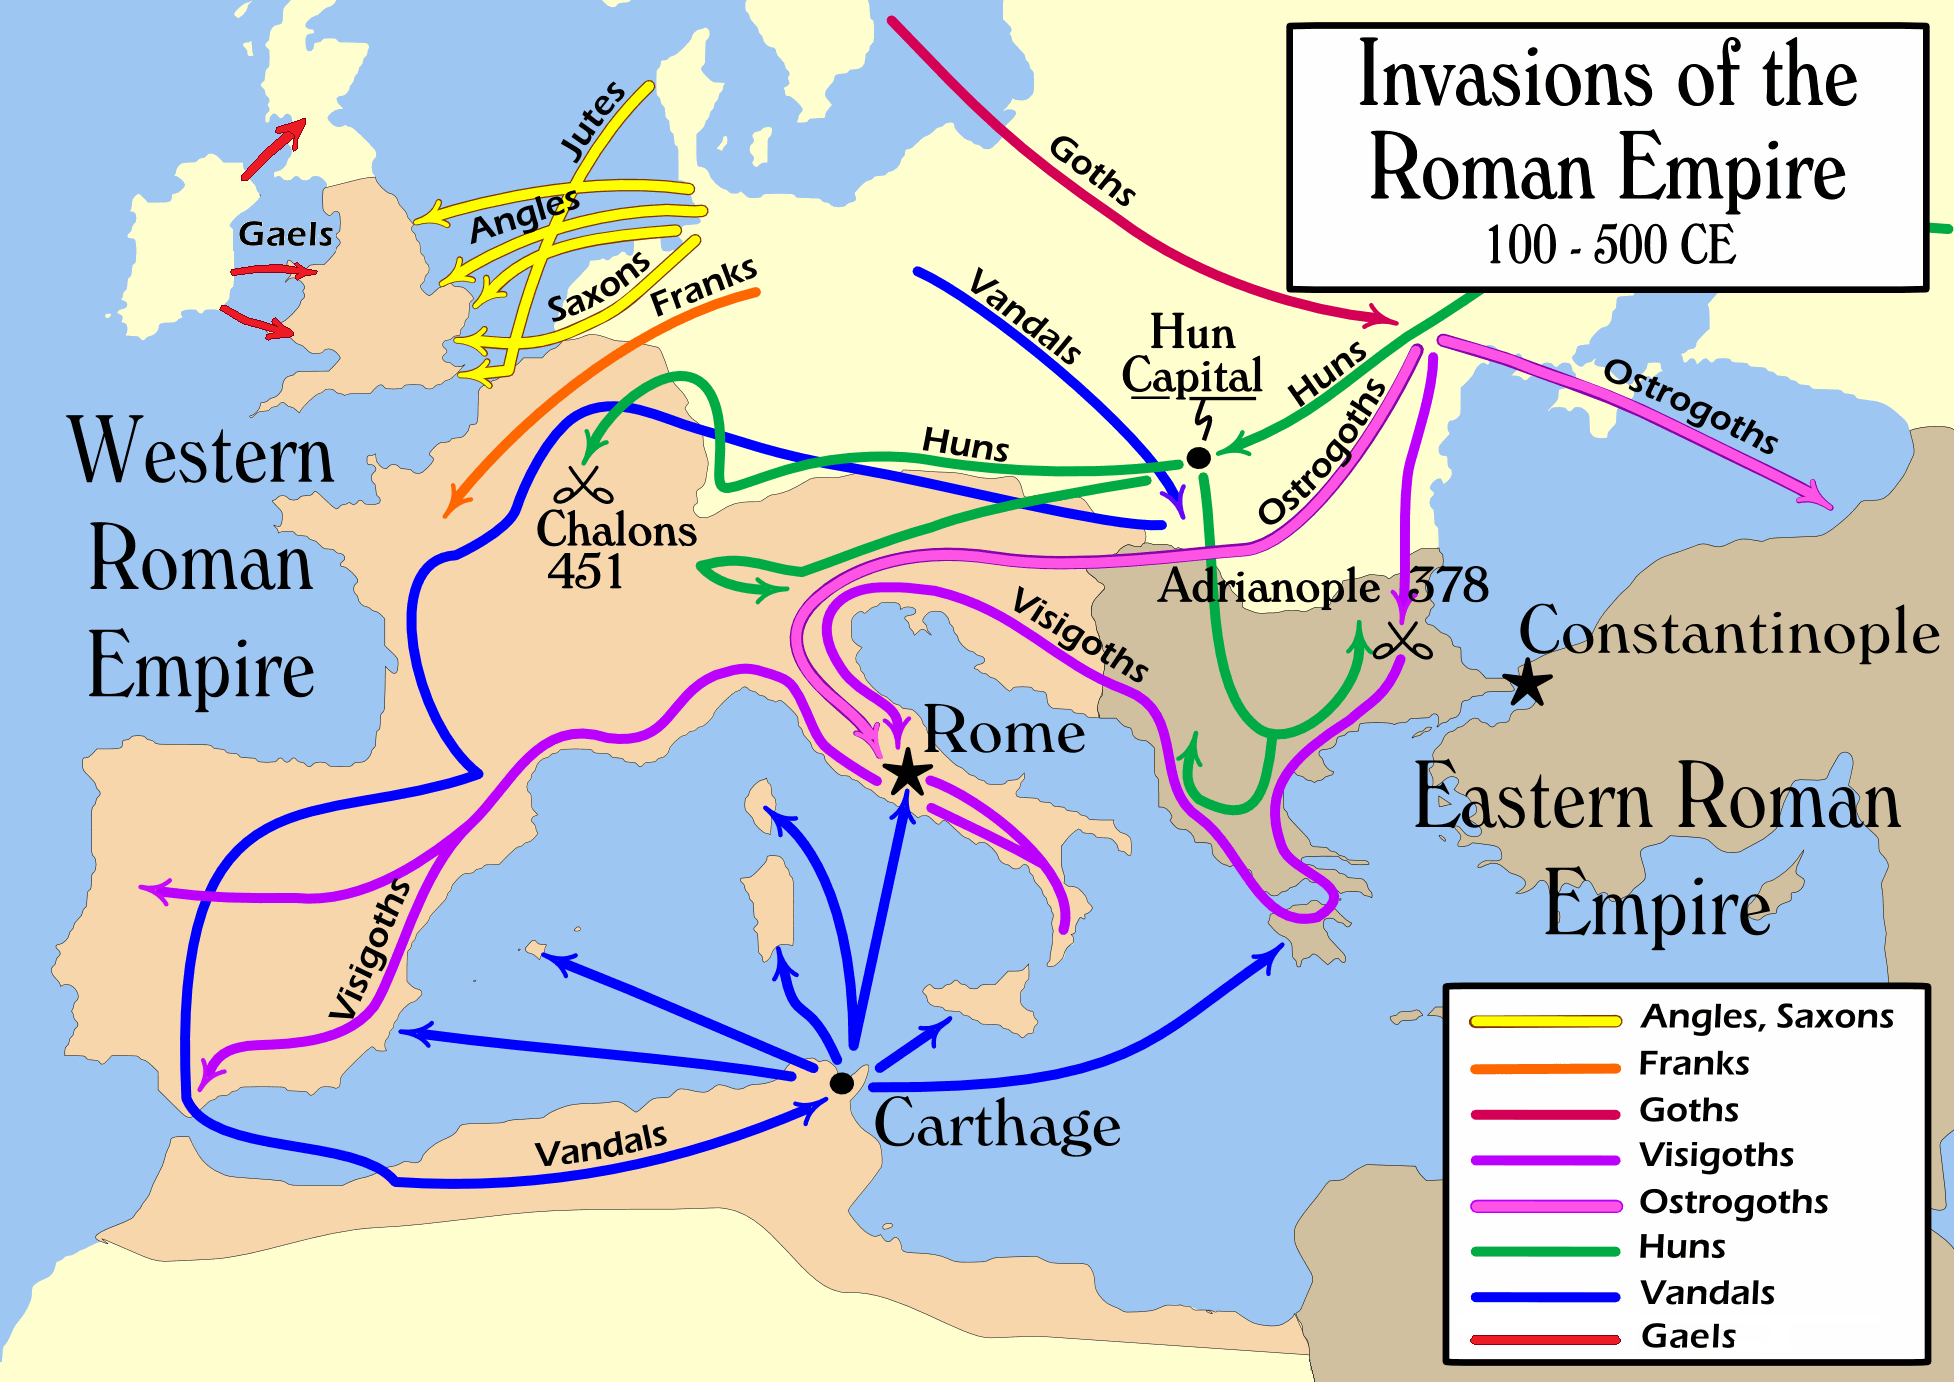 Routes taken by barbarian invaders of the Roman Empire during the Migration Period